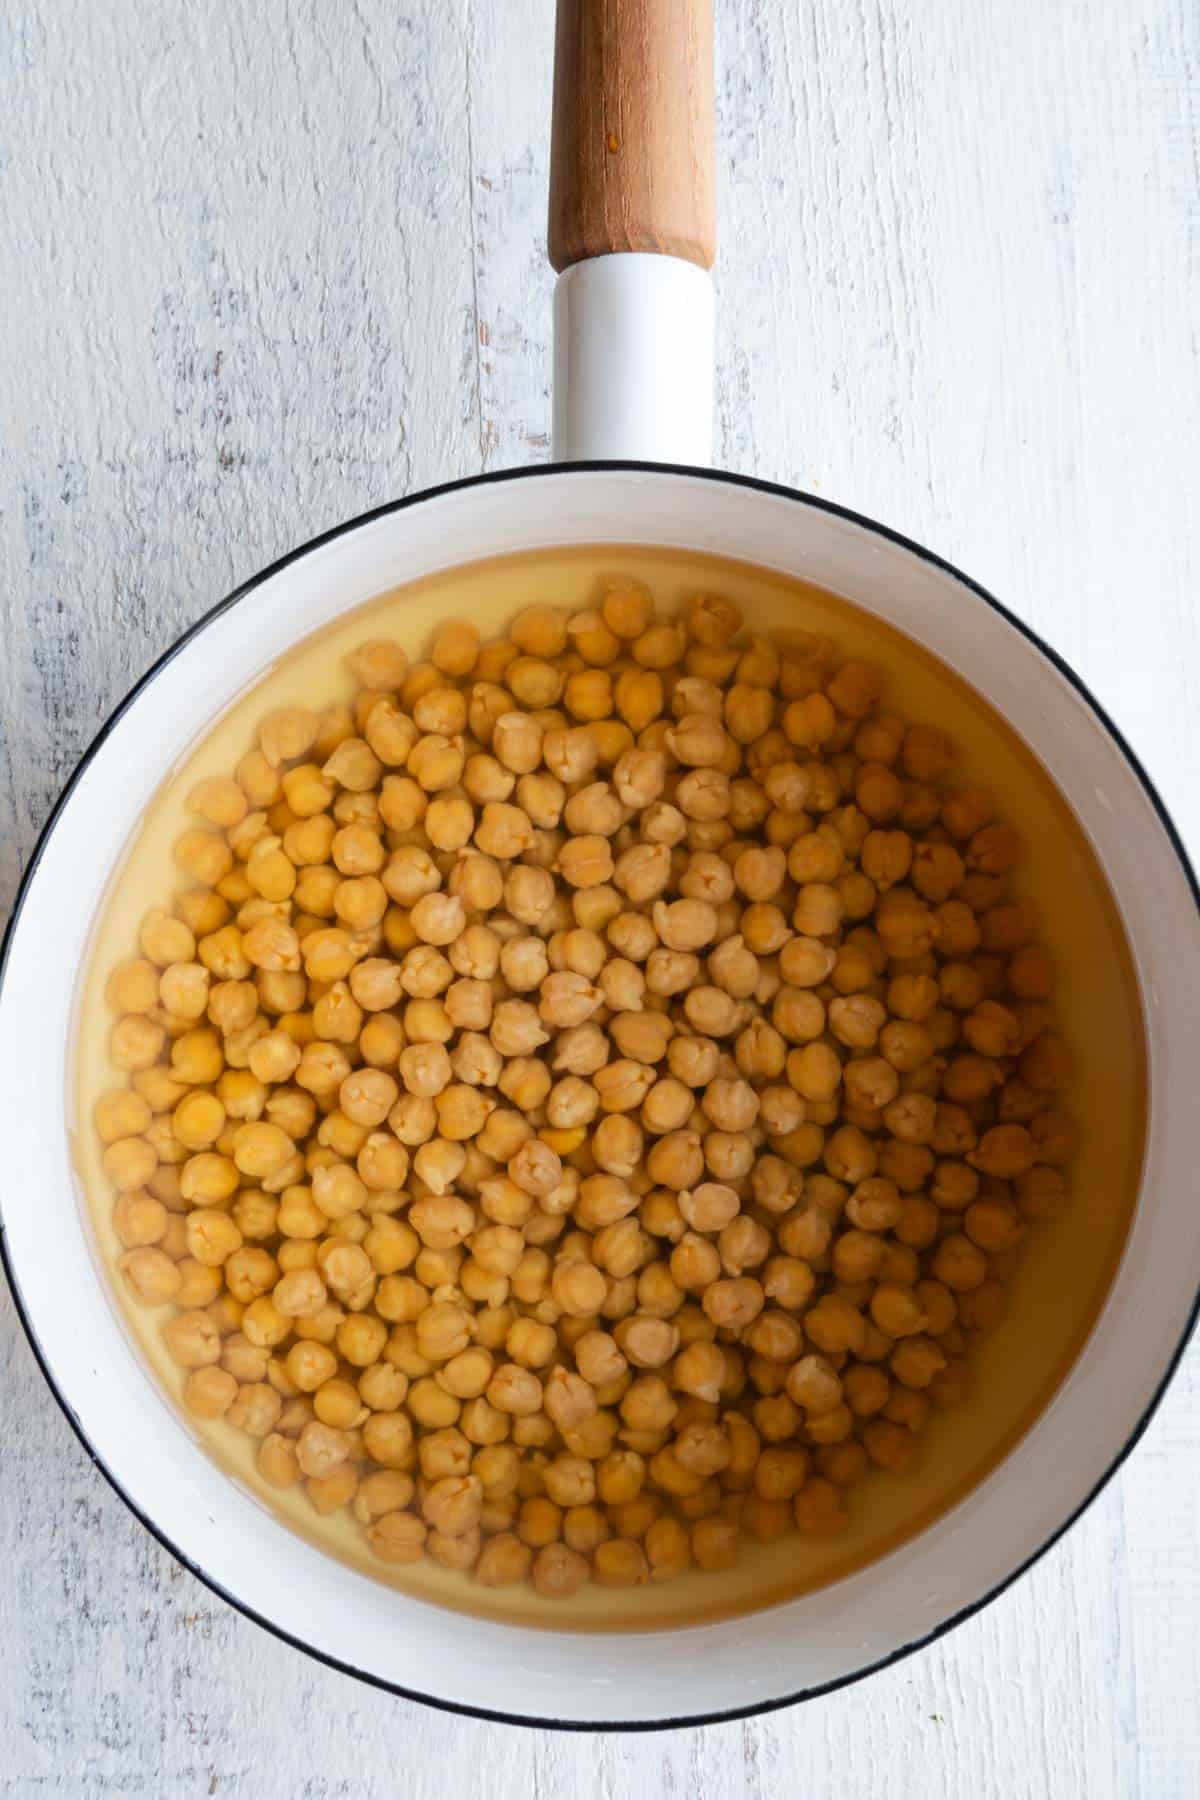 Chickpeas soaking in water in a white saucepan.